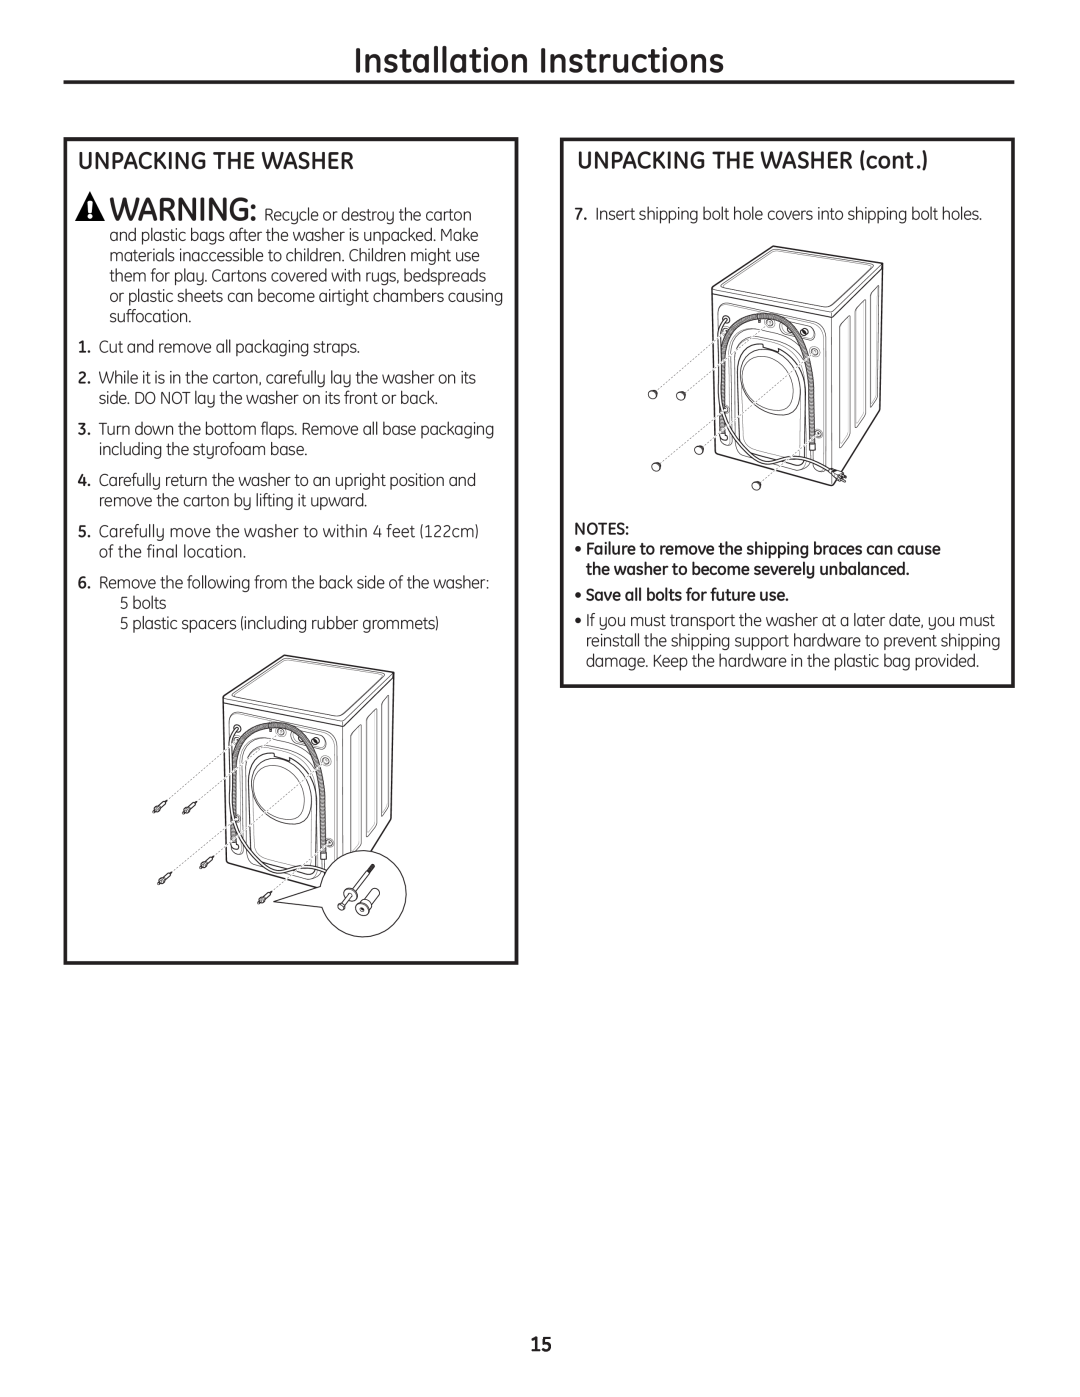 GE 175D1807P633 Unpacking The Washer, UNPACKING THE WASHER cont, Save all bolts for future use, Installation Instructions 